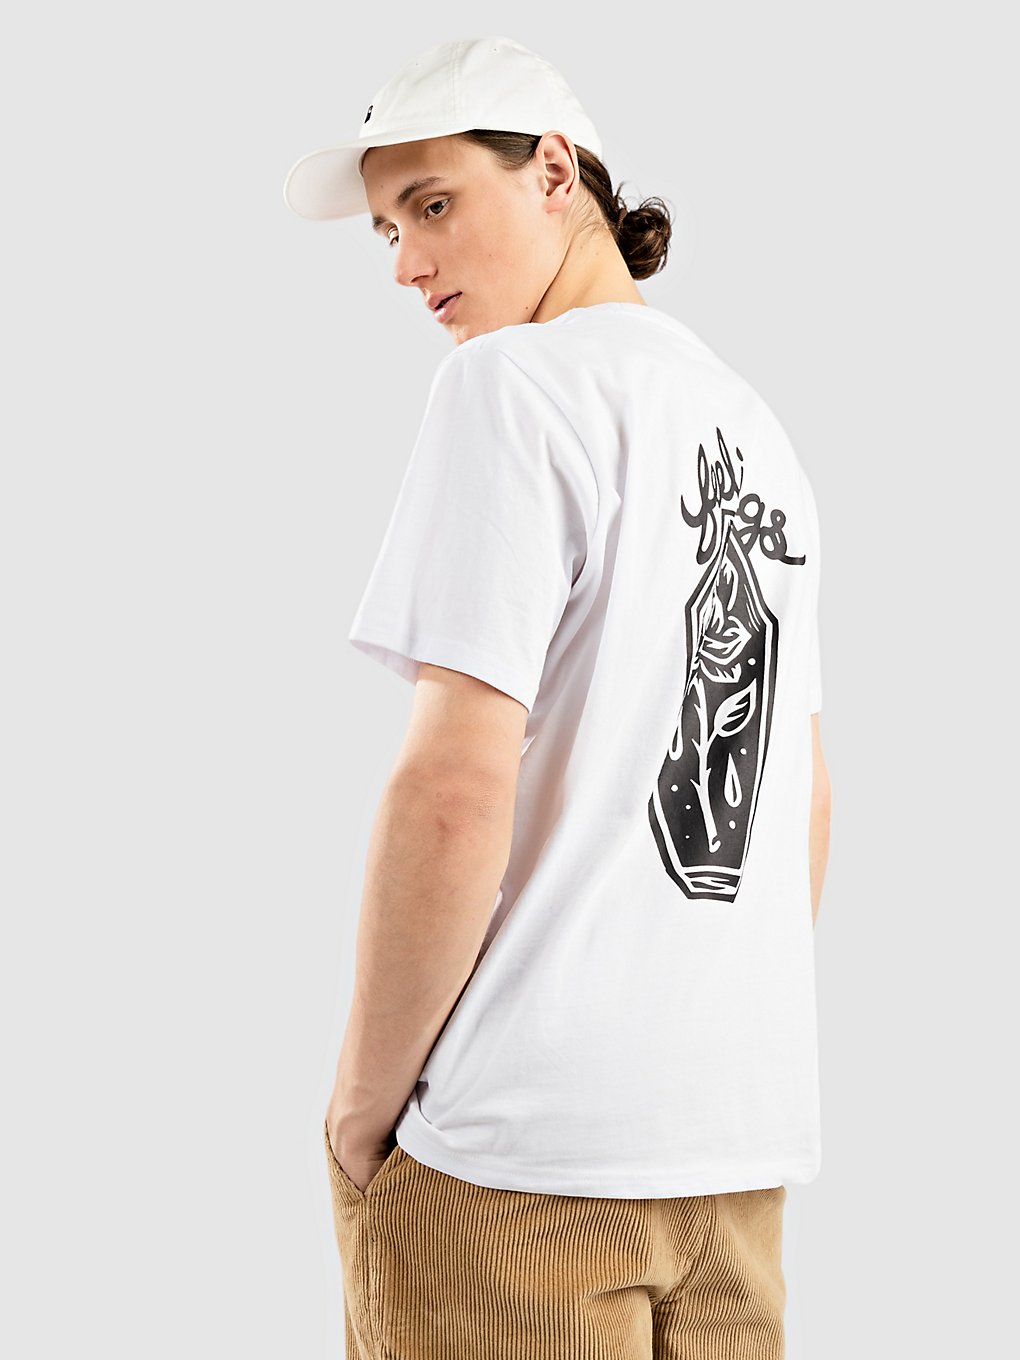 And Feelings Coffin T-Shirt white kaufen